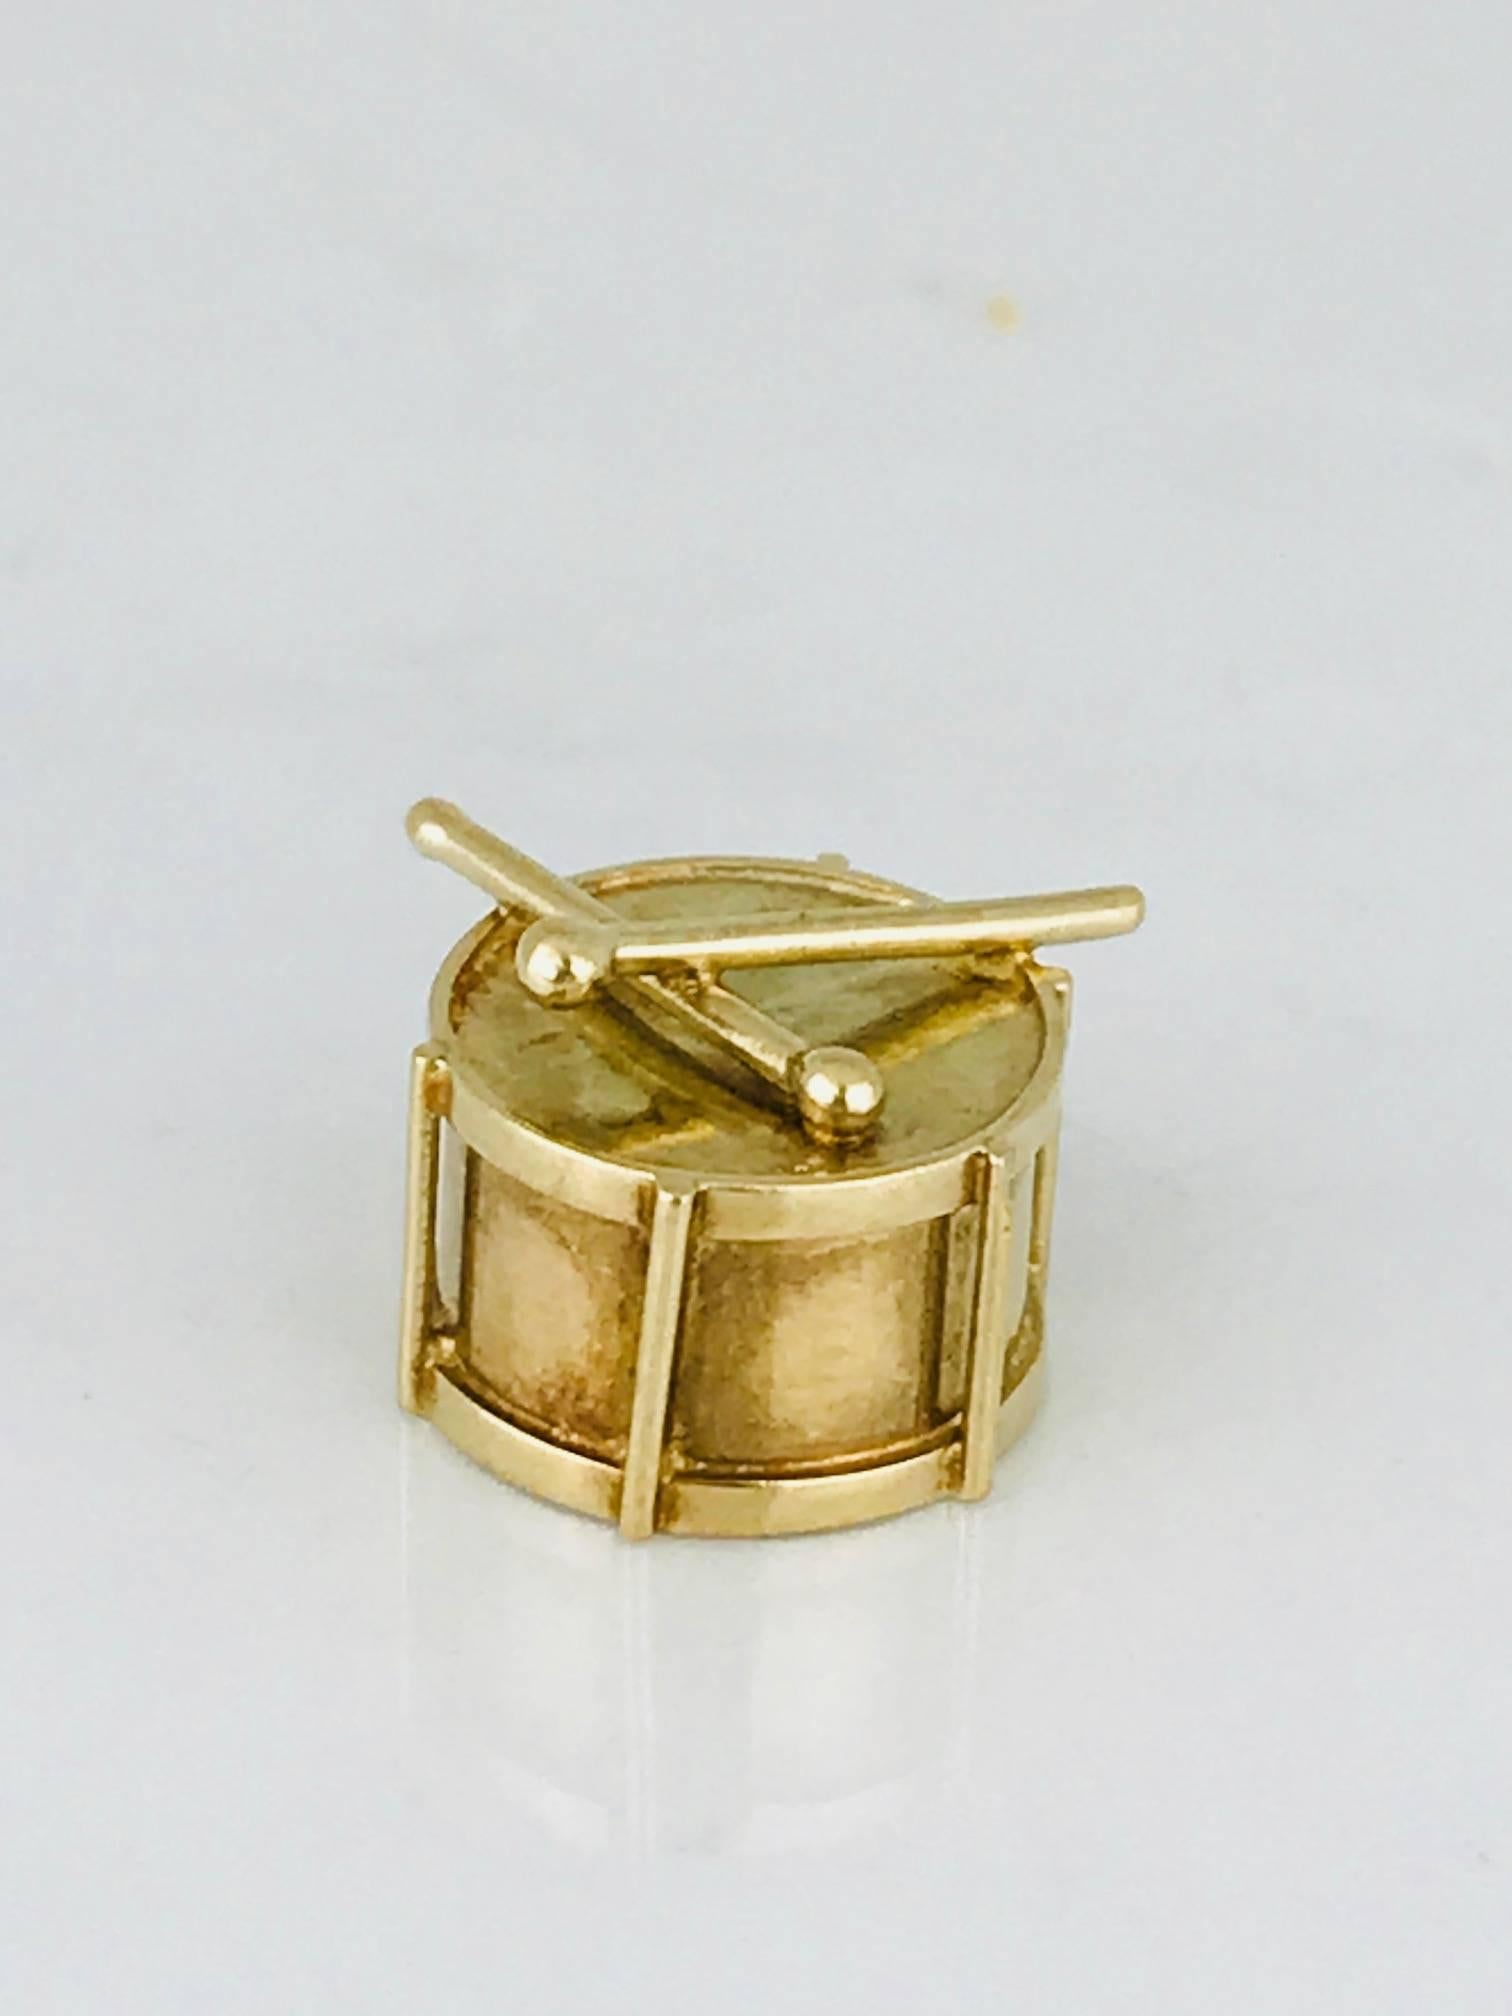 Drum Charm, 14 Karat Yellow Gold, Circa 19350's
Vintage, unique and hard to find Drum Charm can be used for charm bracelet or necklace

GIA Gemologist, inspected & evaluated